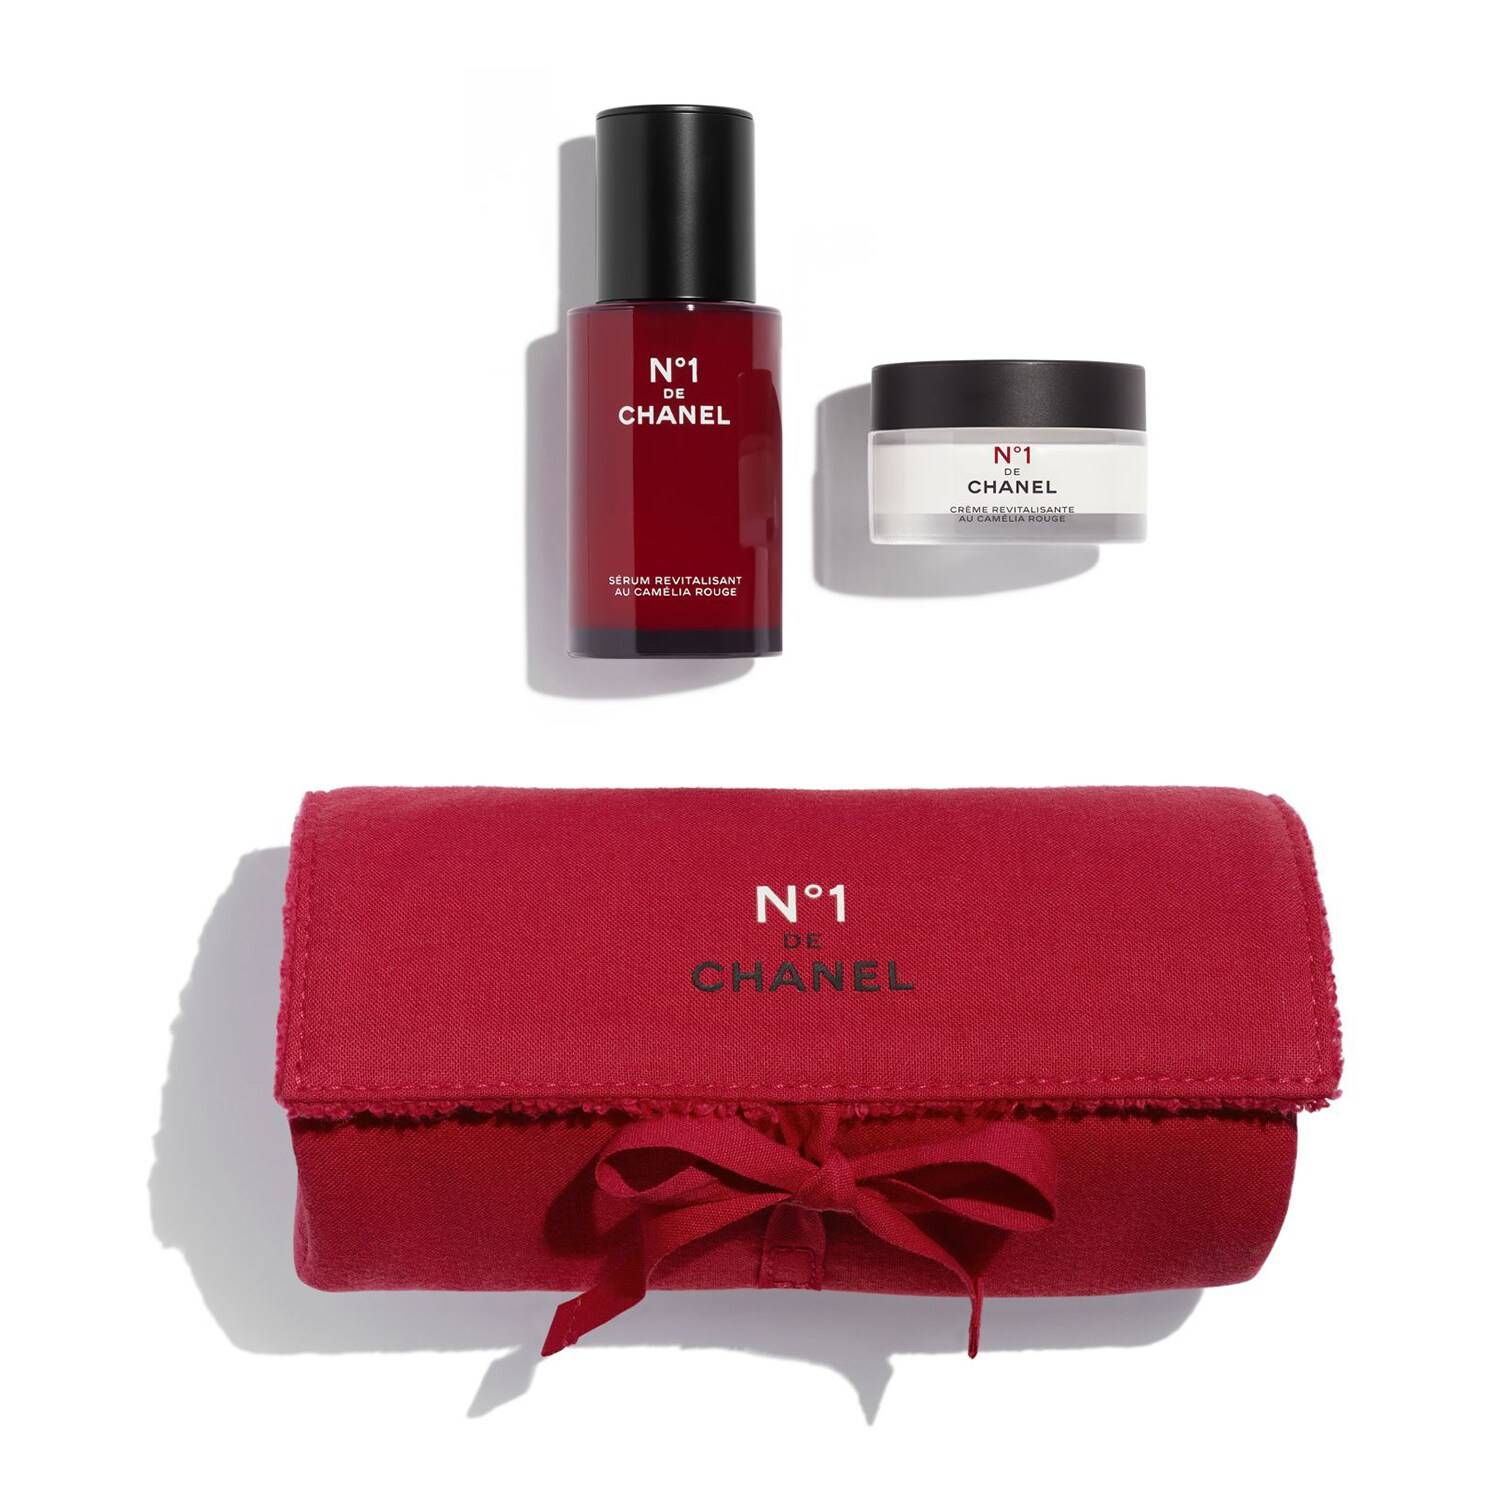 Chanel Ndeg1 De Chanel Red Camellia Revitalizing Duo + Exclusive Pouch Duo